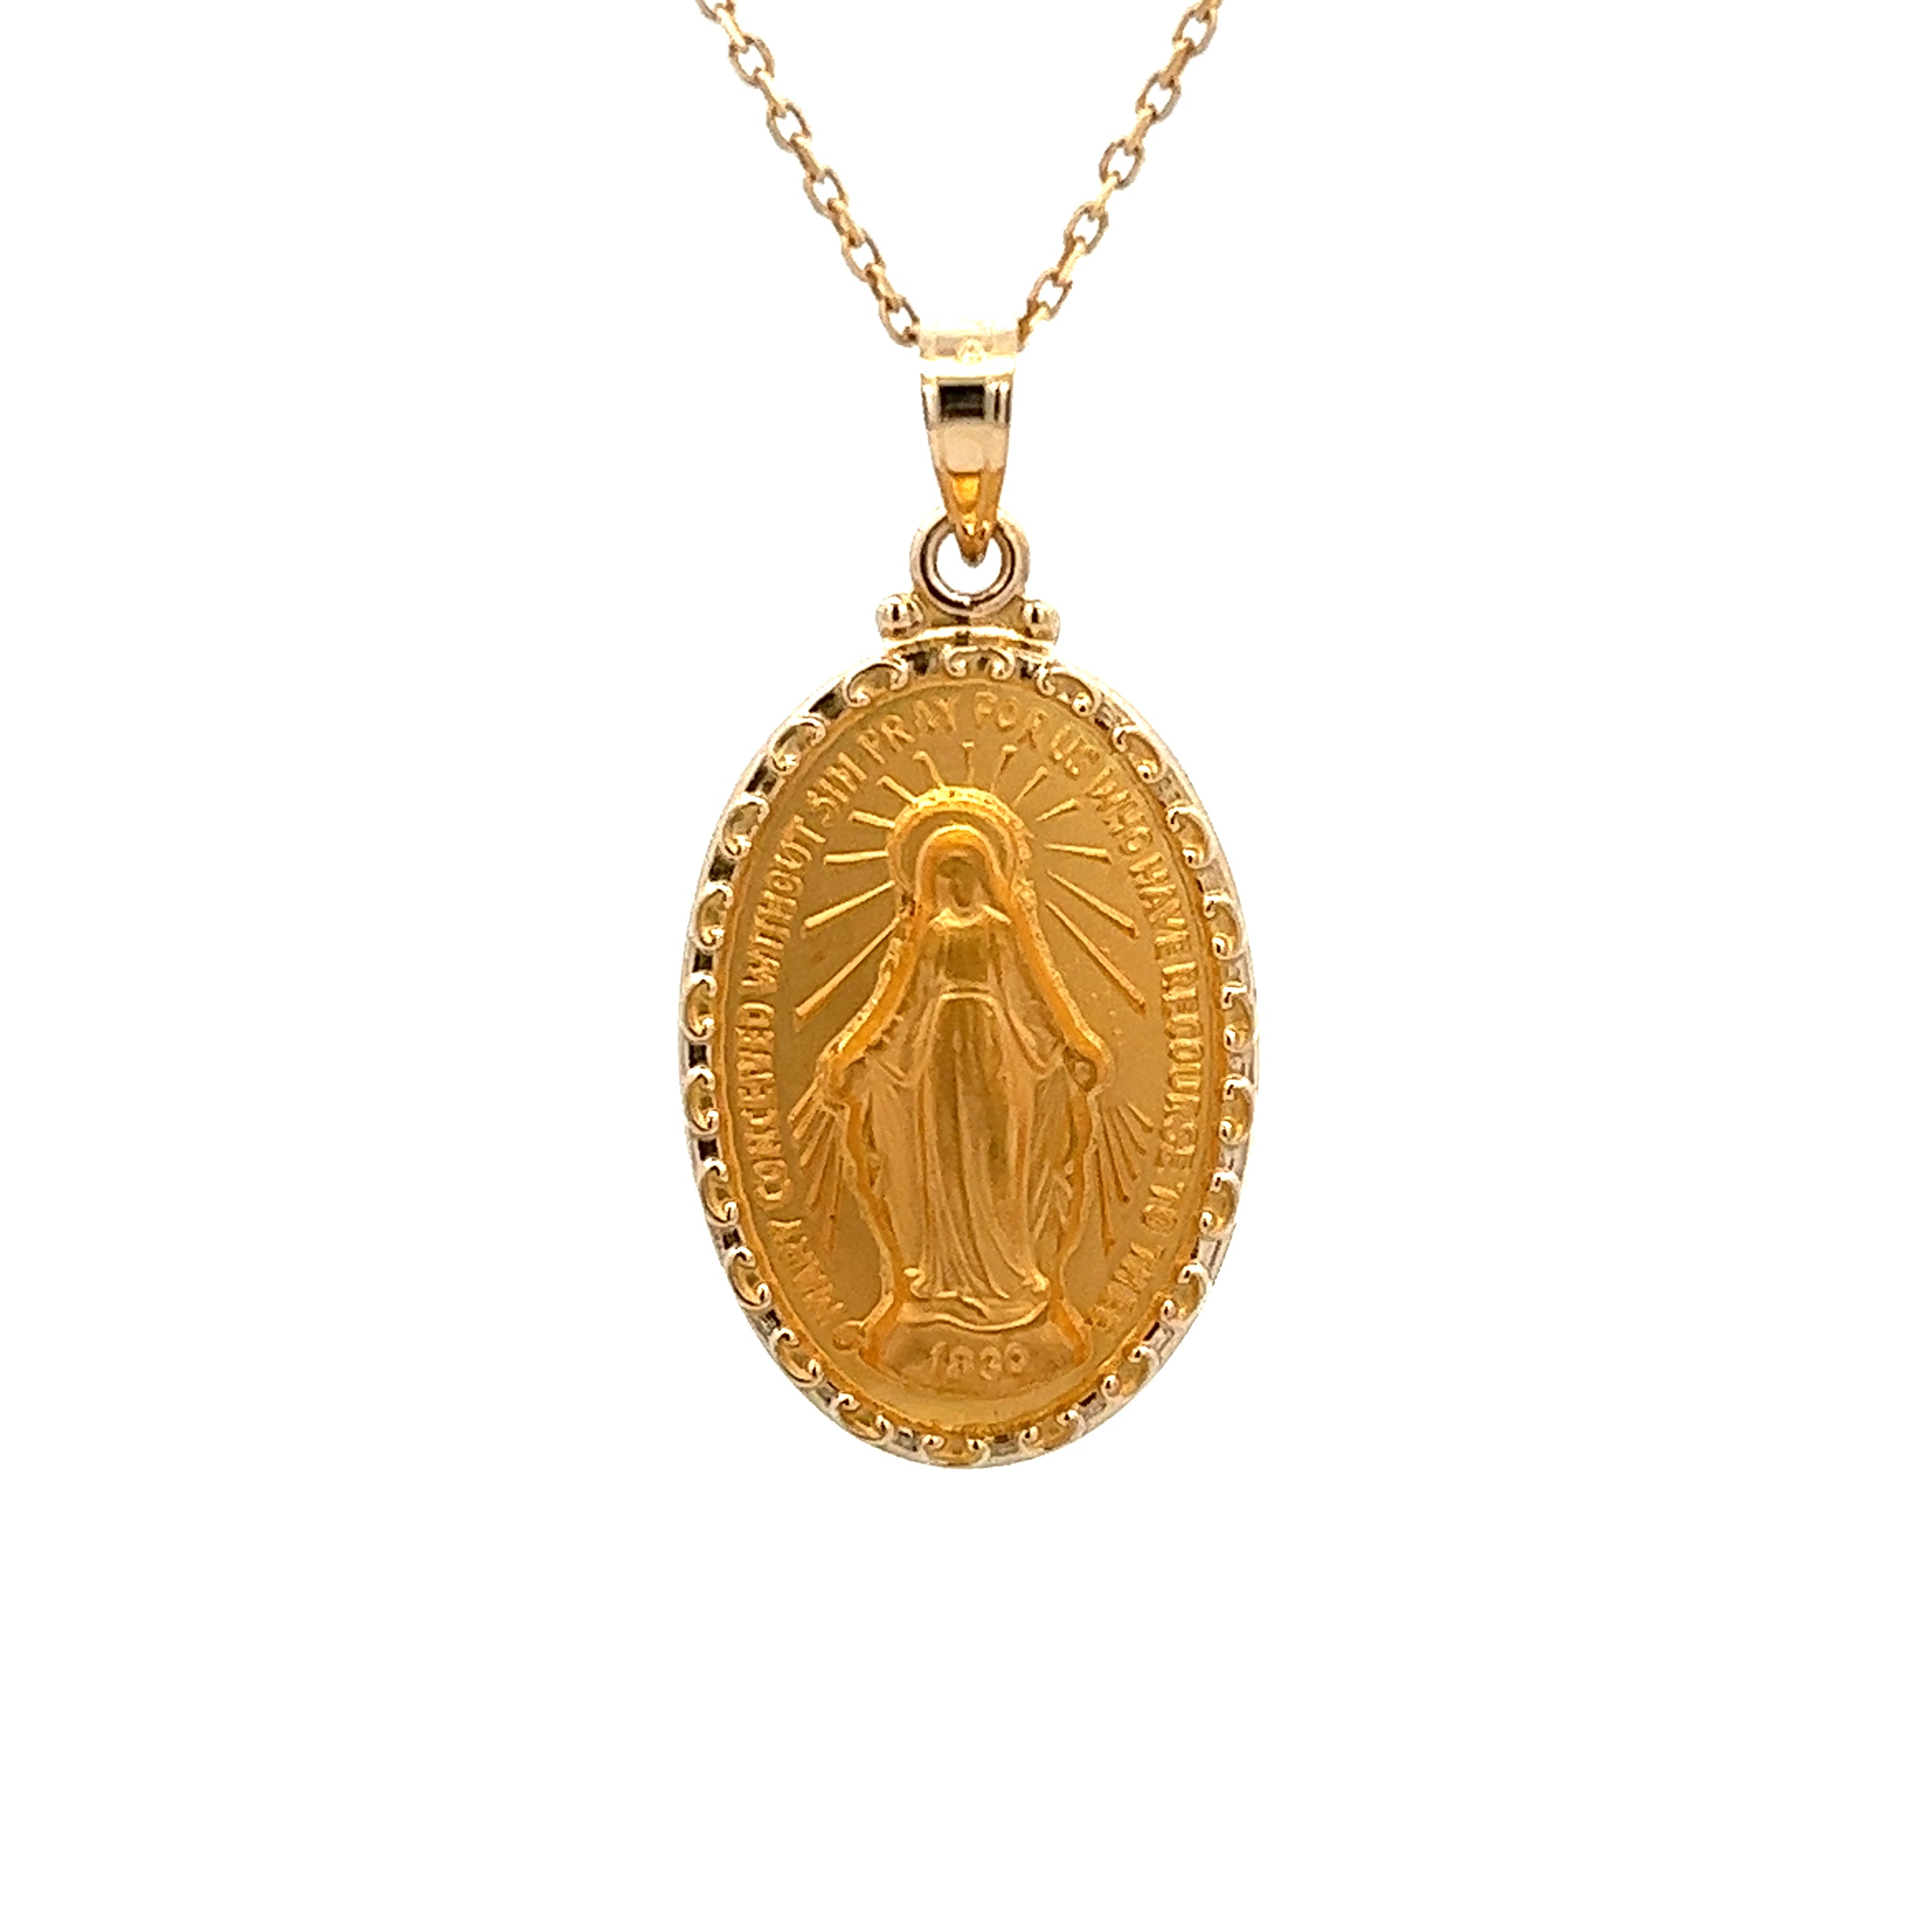 14K GOLD MIRACULOUS VIRGIN MEDALL WITH DOT EDGES